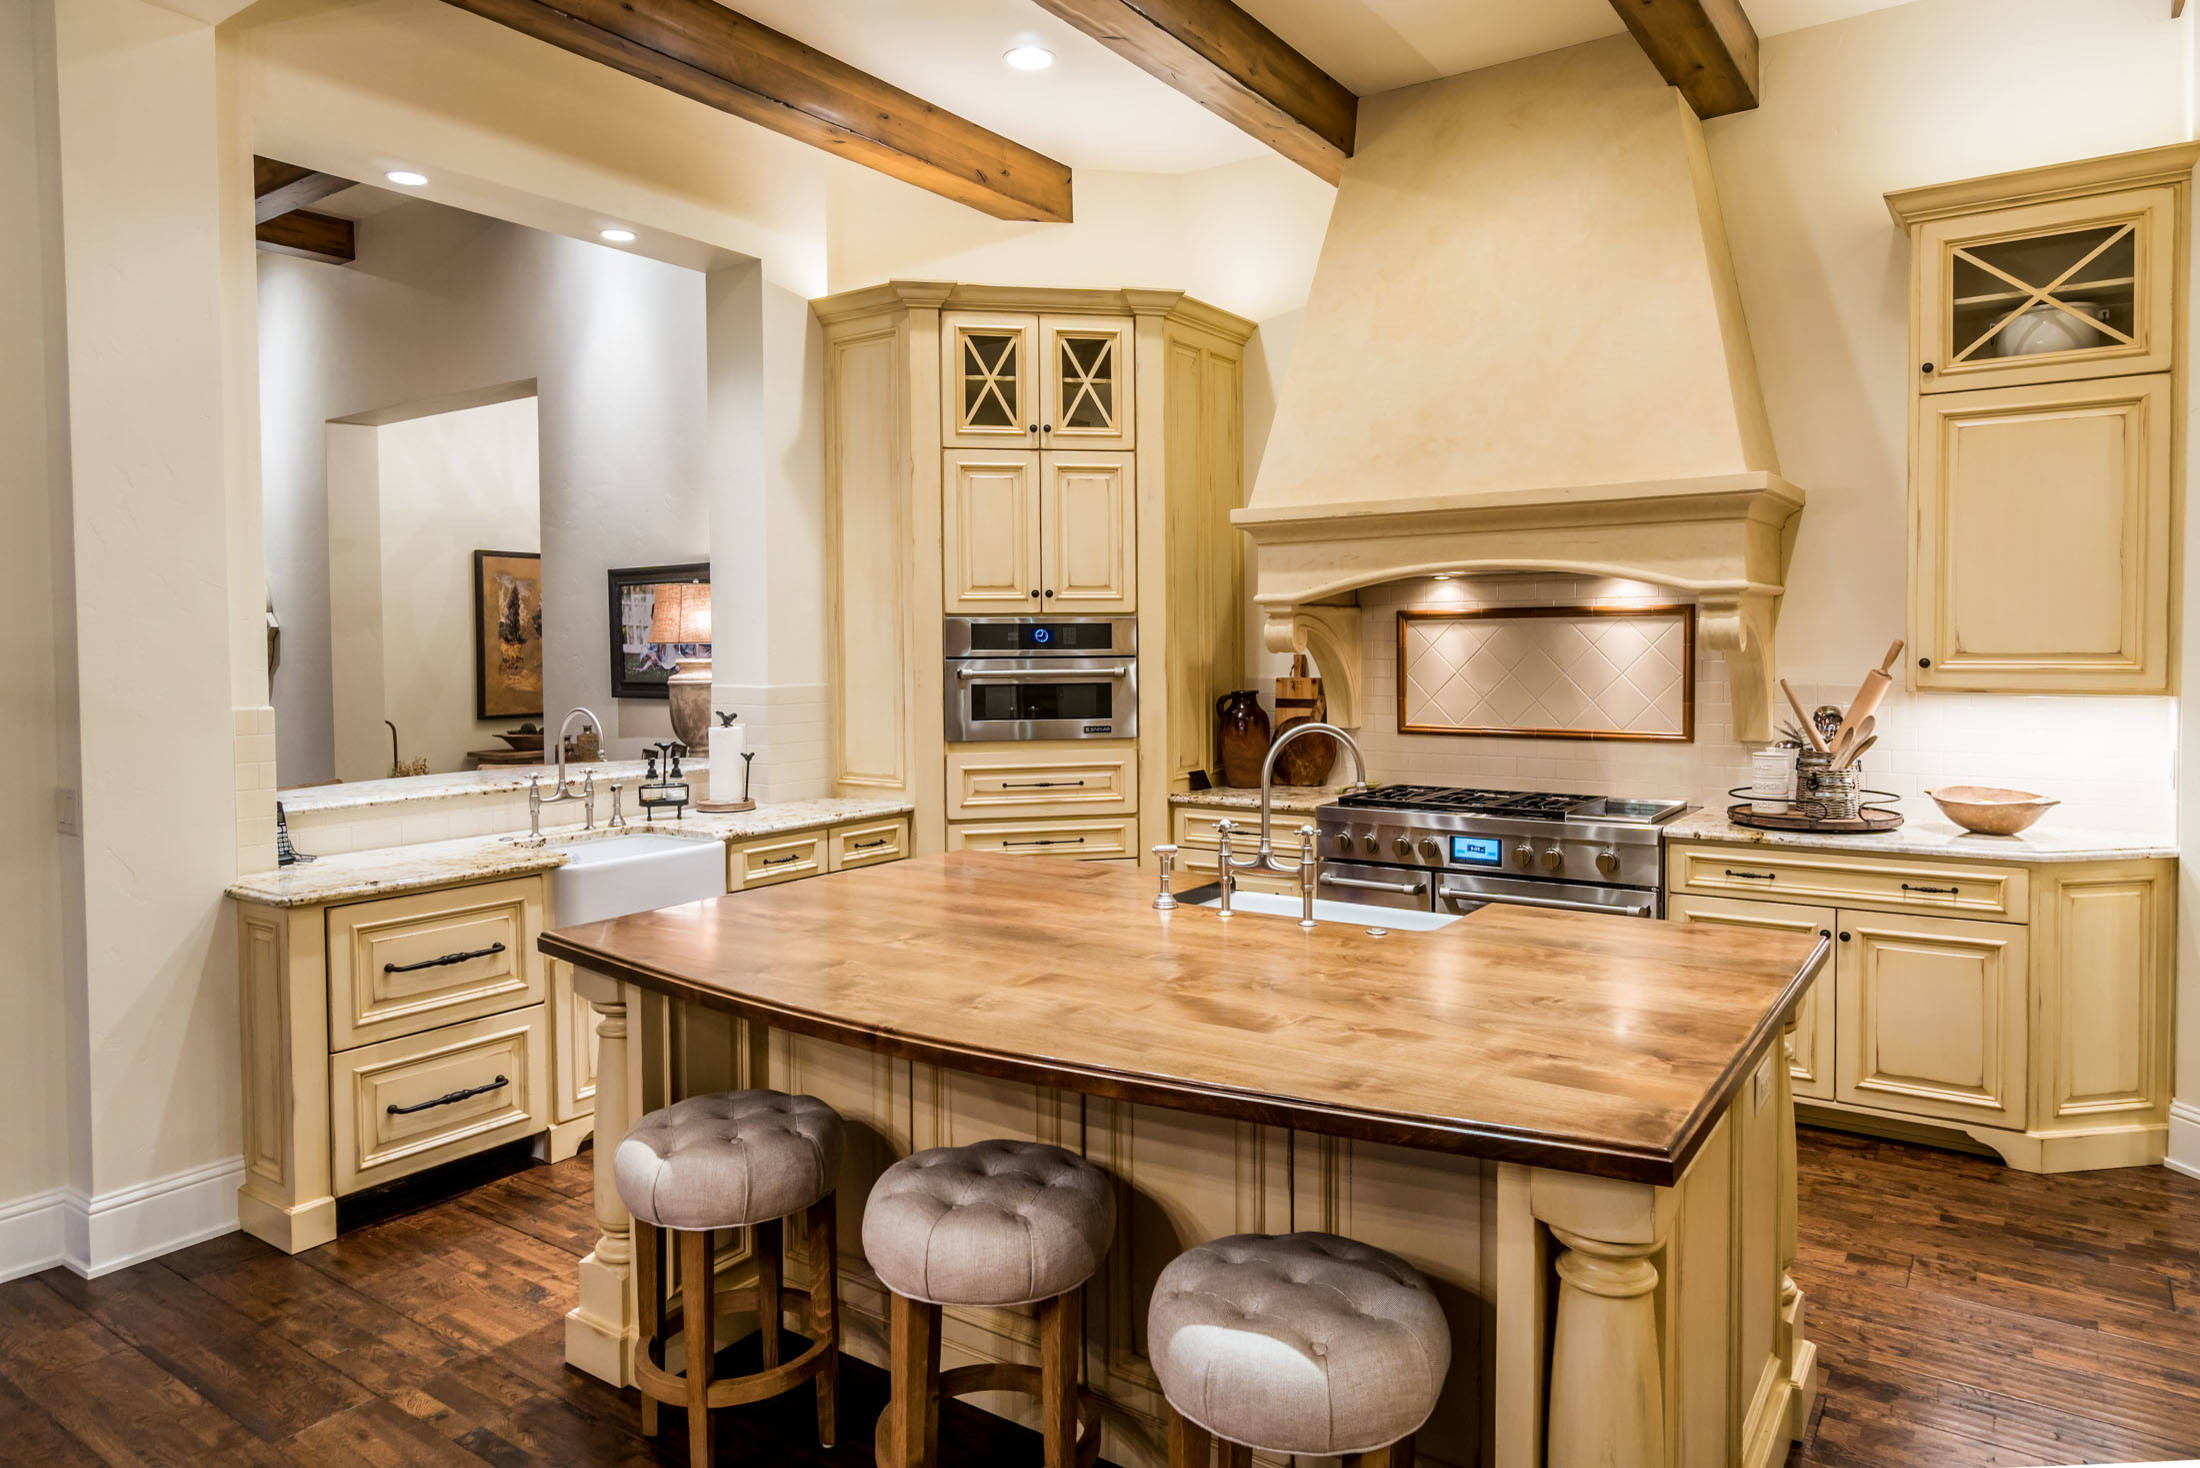 The Rustic Kitchen
 15 Inspirational Rustic Kitchen Designs You Will Adore